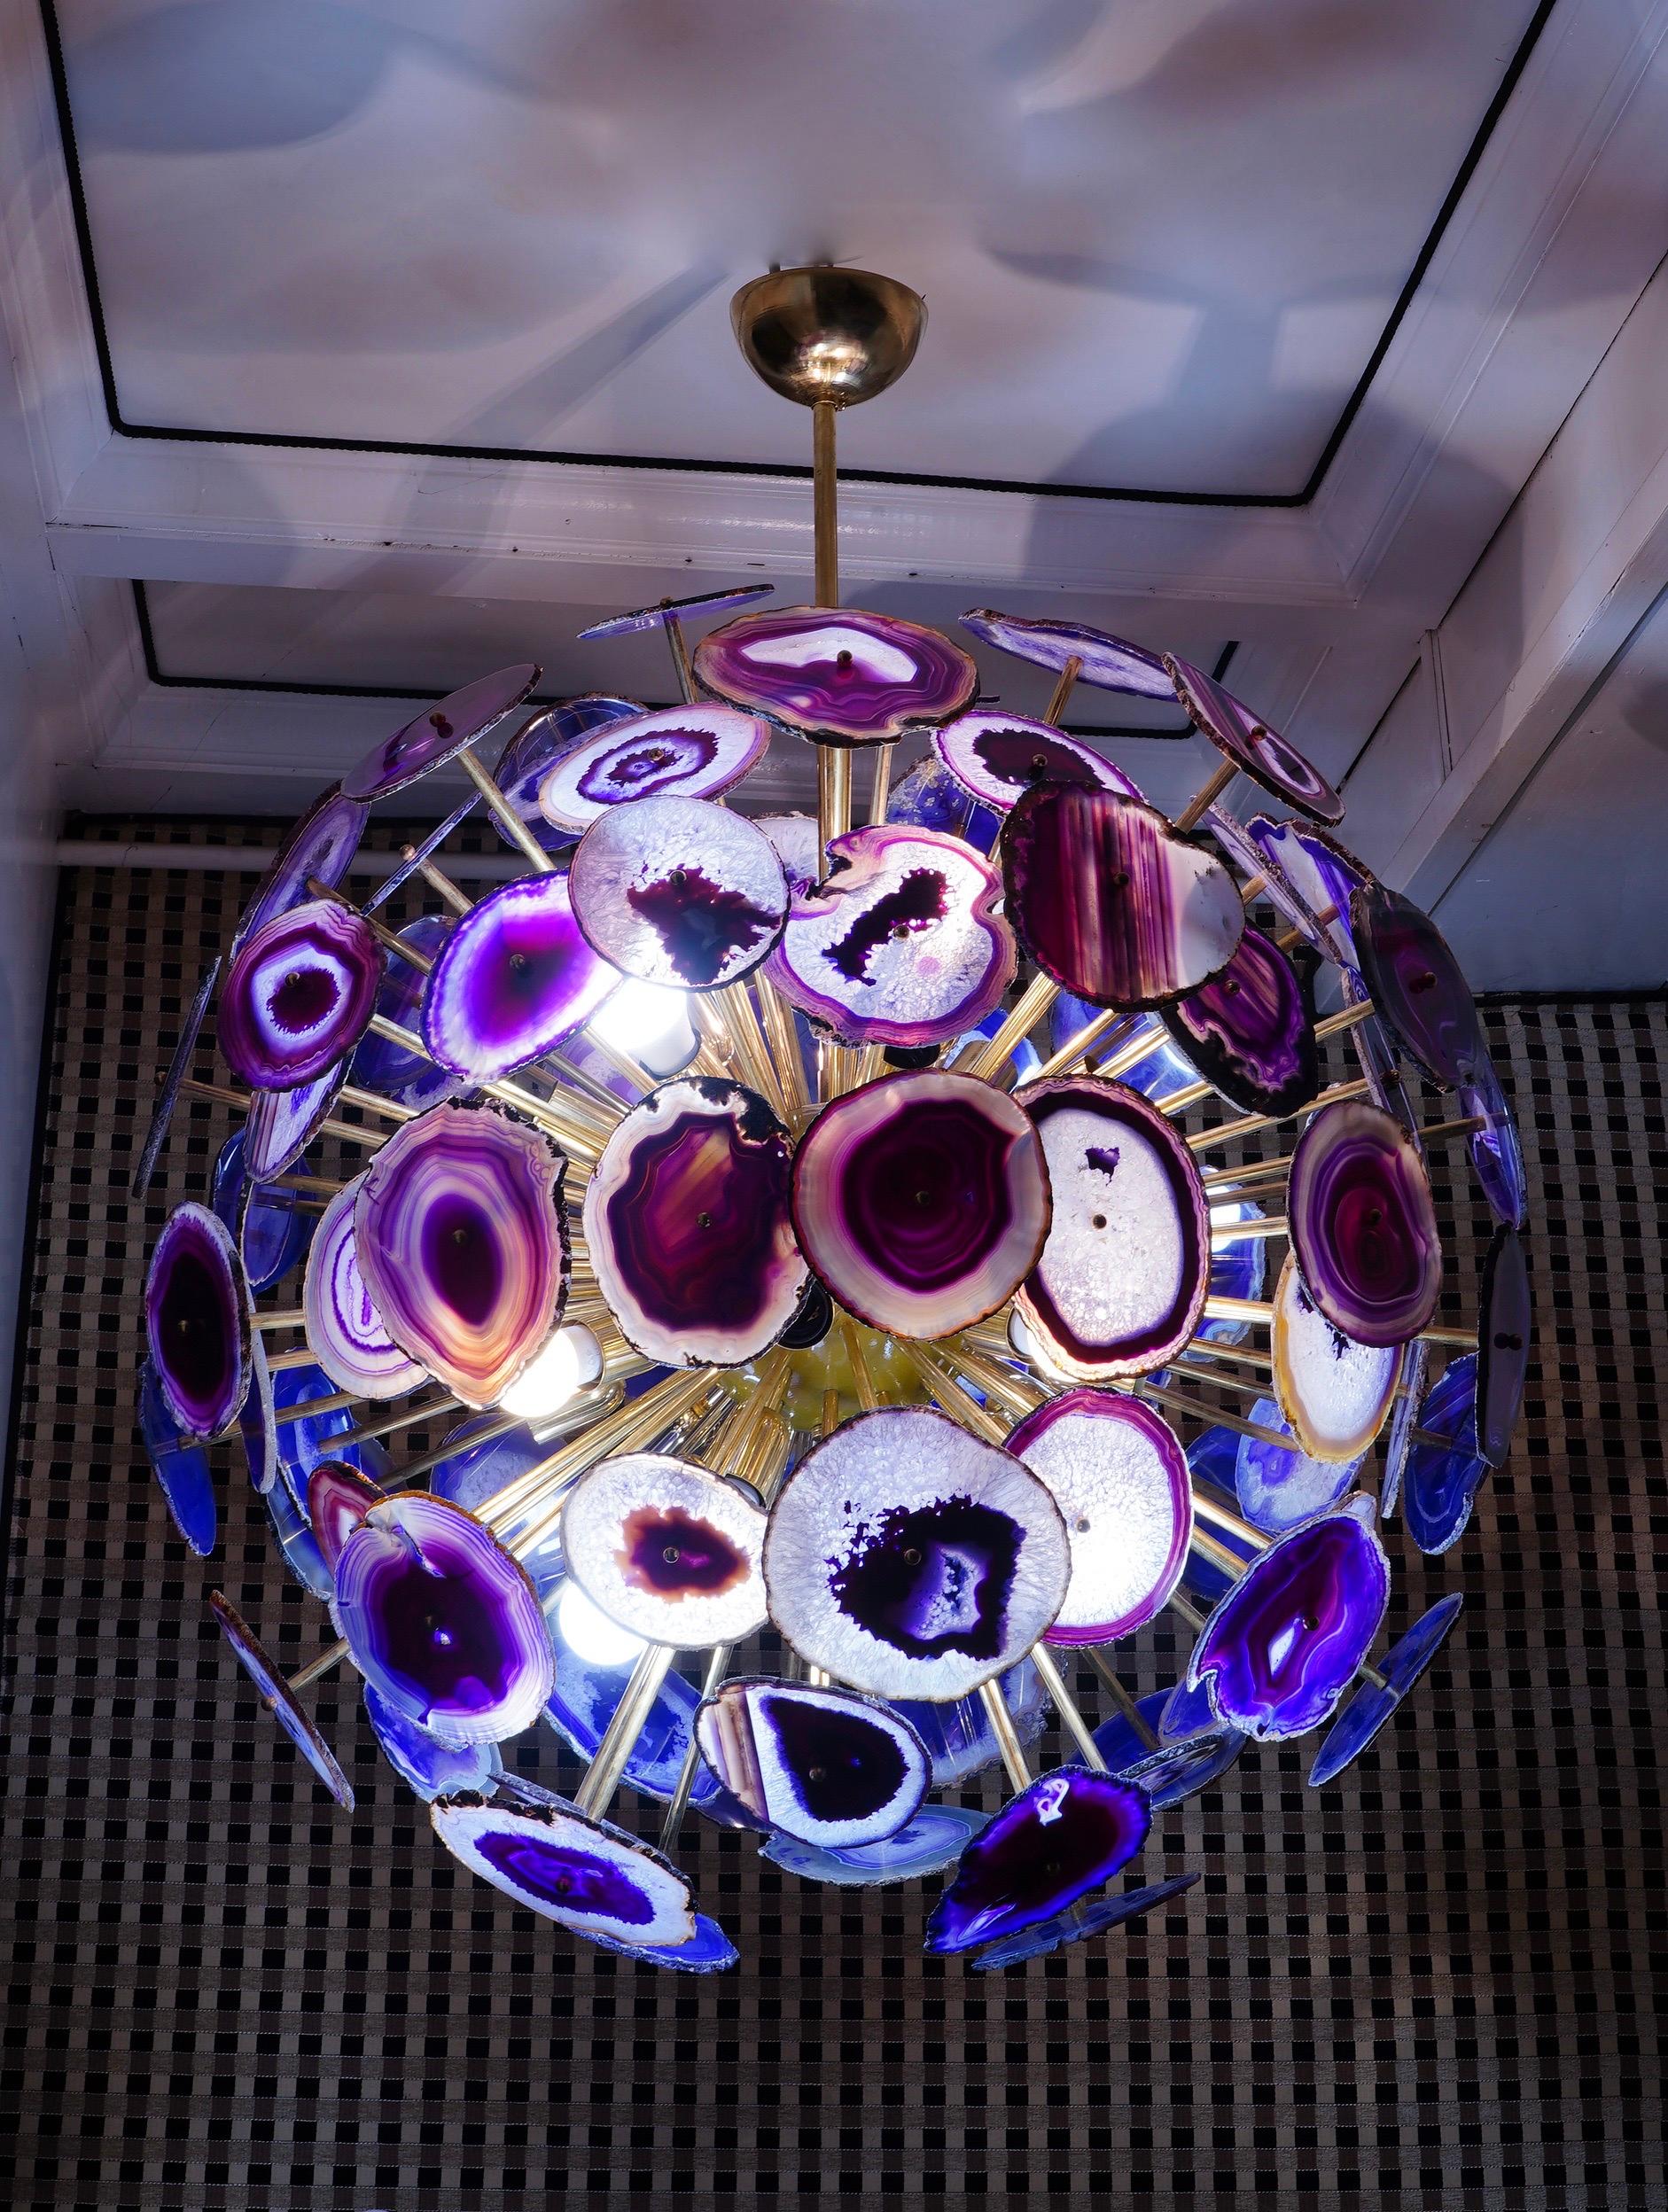 A fantastic spot of purple color. Gorgeous chandelier in a beautiful purple color coming from the agate hard stone.

Structure completely in brass like a sputnik, with agate stones. Perfectly spherical this brass Sputnik with agate stones attached